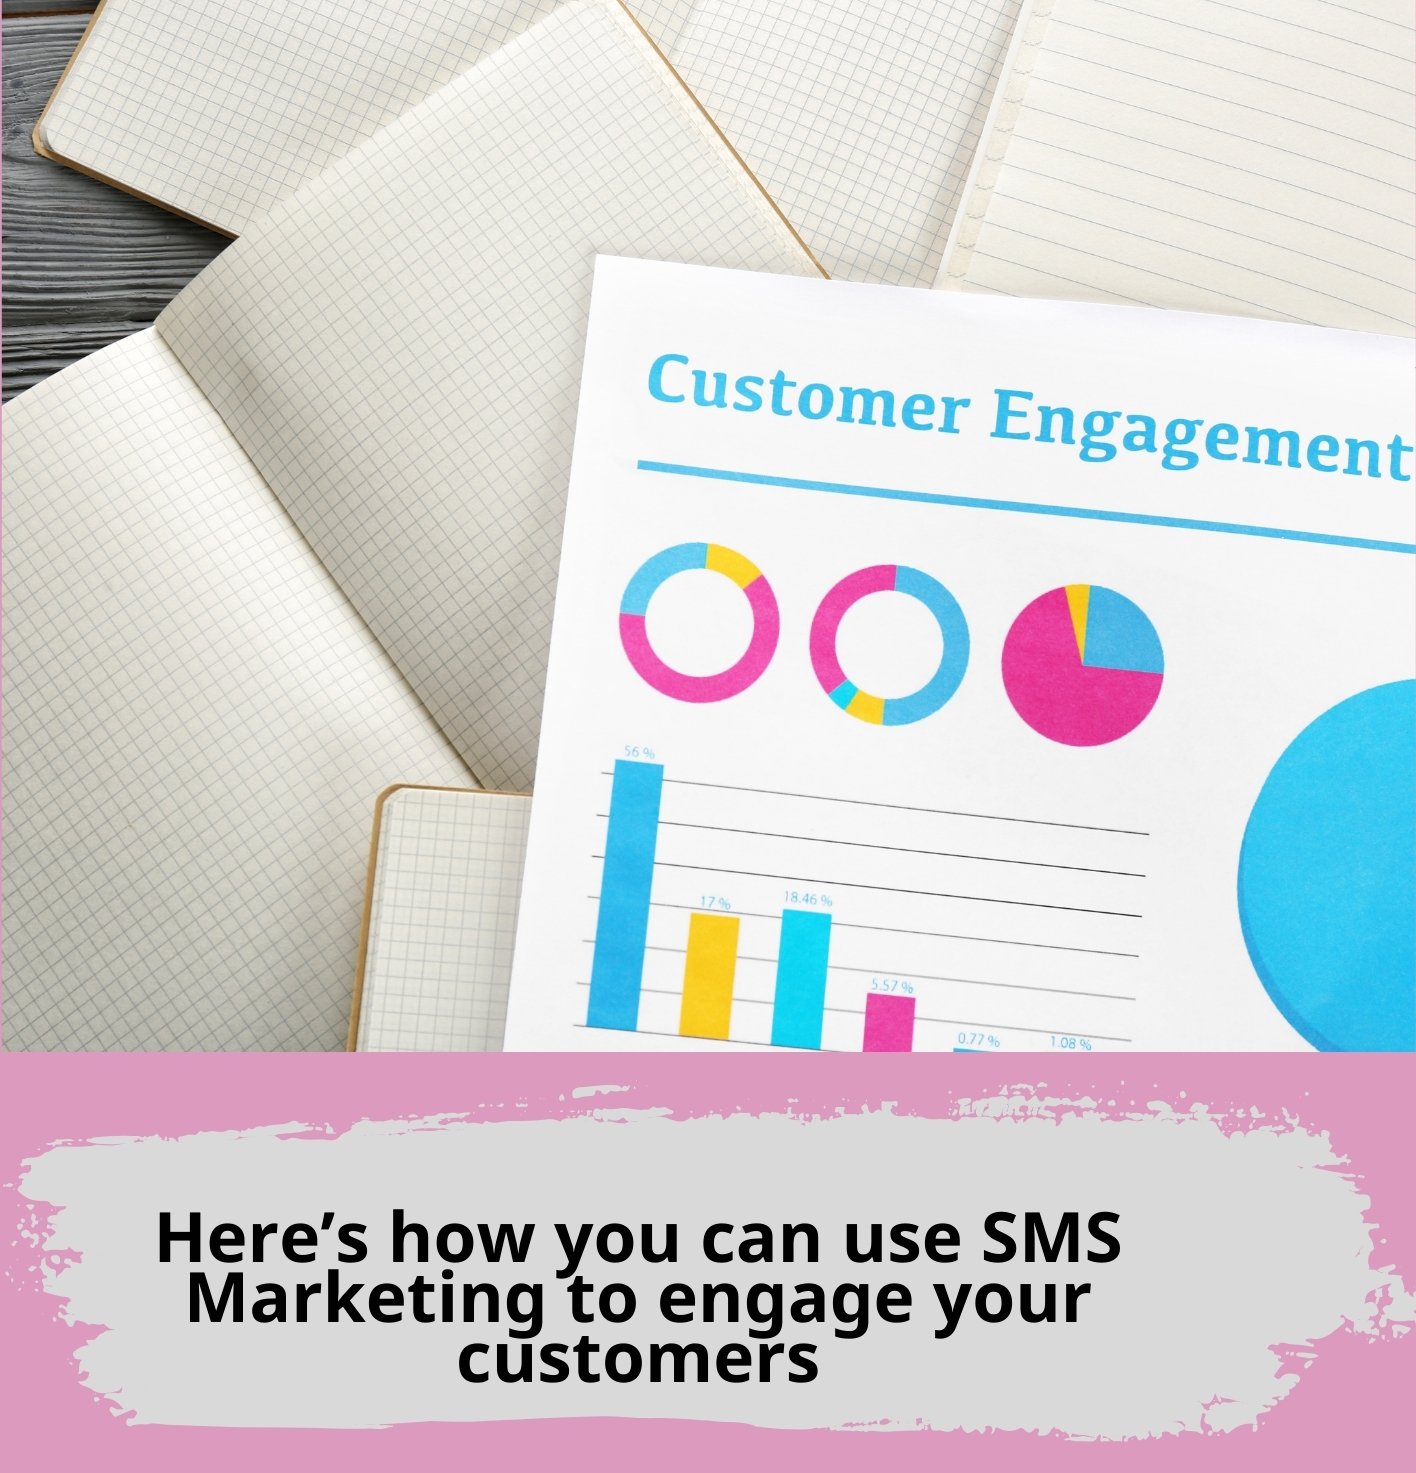 Here’s how you can use SMS Marketing to engage your customers